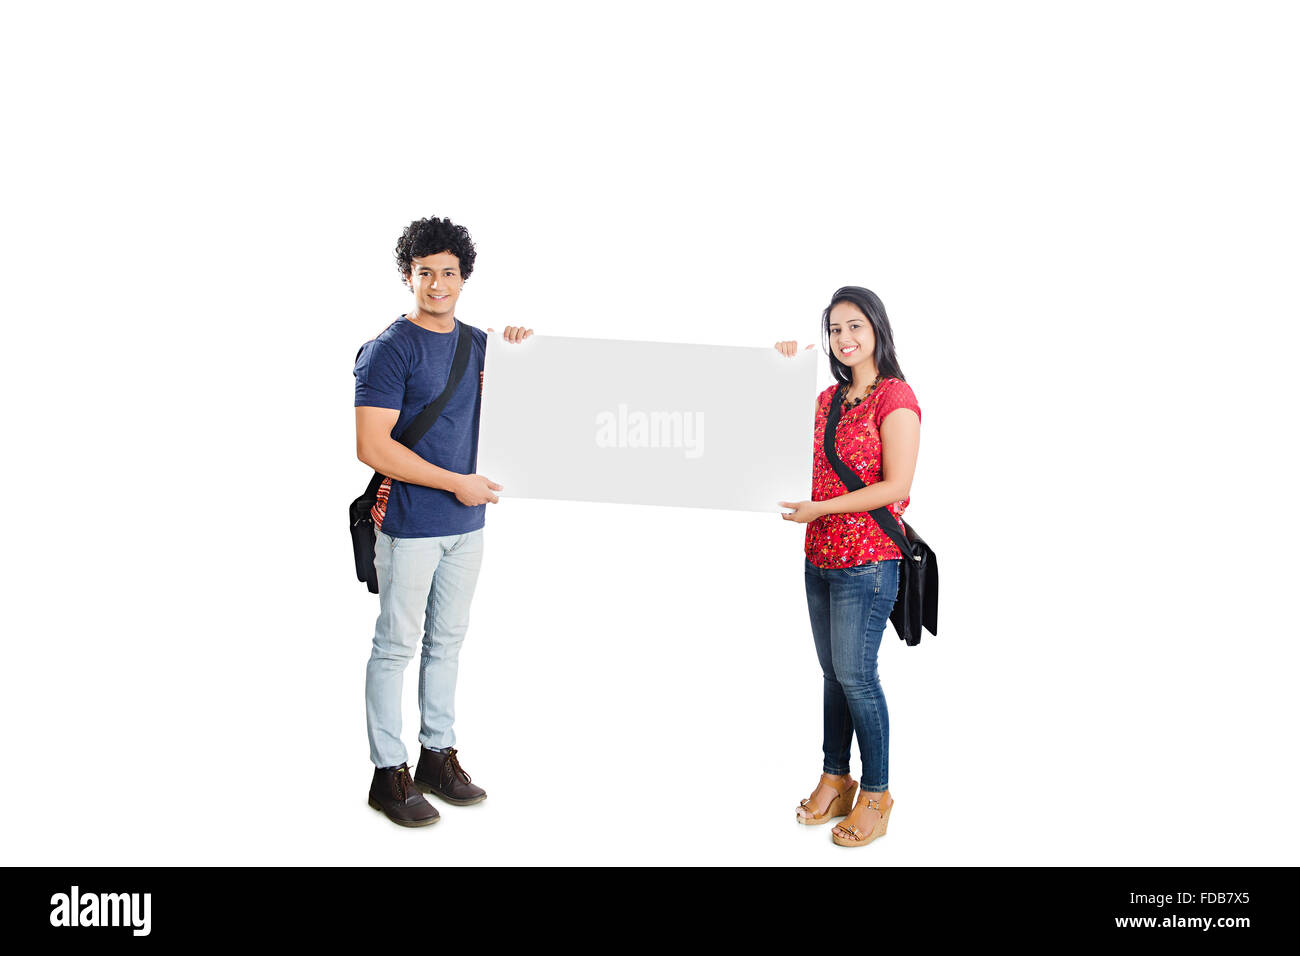 2 adolescents amis College Student message board montrant Banque D'Images